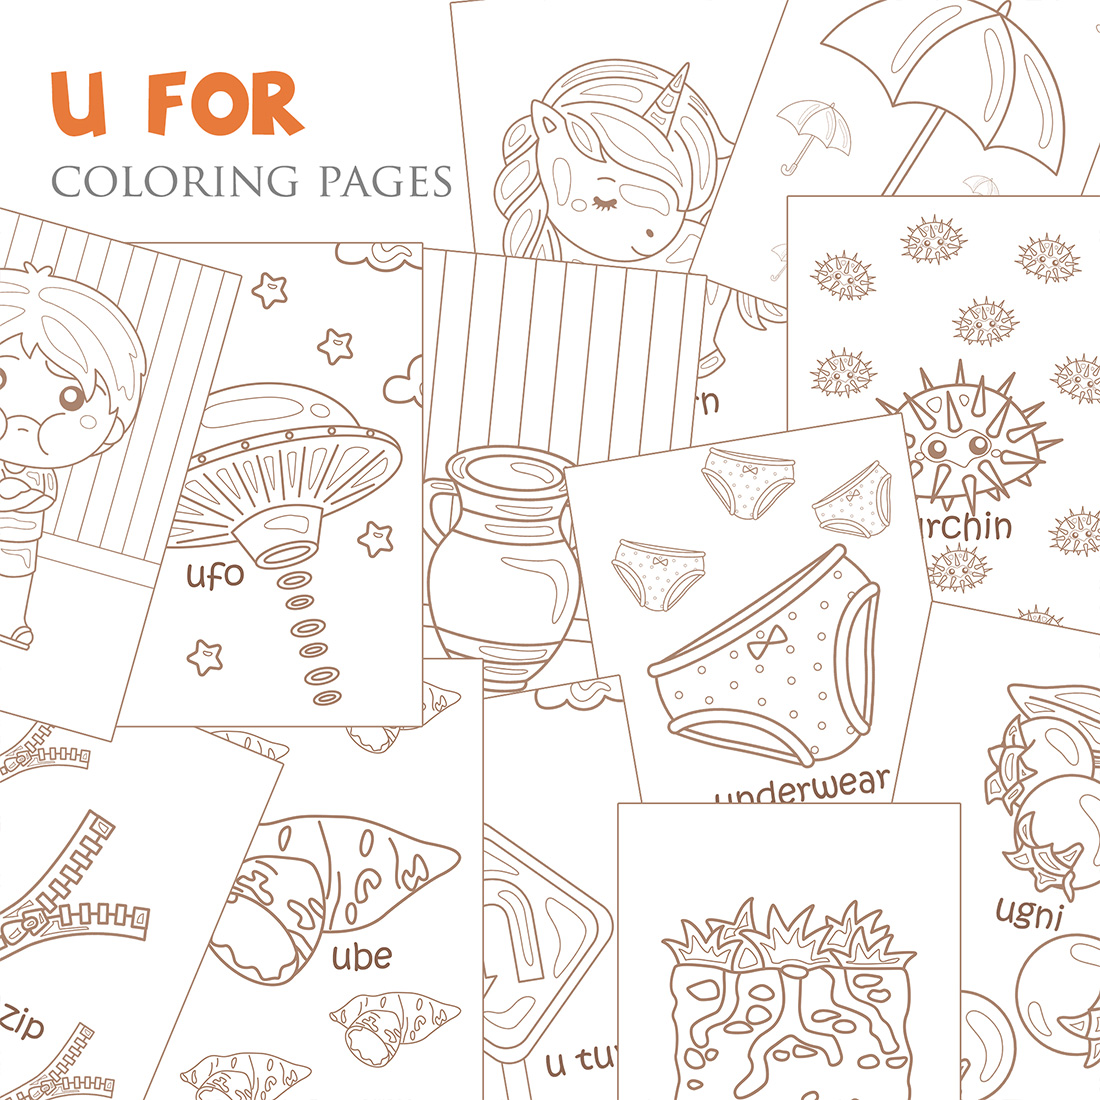 Alphabet U For Vocabulary School Letter Reading Writing Font Study Learning Student Toodler Kids Ube U Turn Unzip Underground Underwear Ugni Umbrella Unicorn Ufo Upset Urchin Urn Cartoon Lesson Illustration Vector Clipart Cartoon Coloring Pages for Kids and Adult cover image.